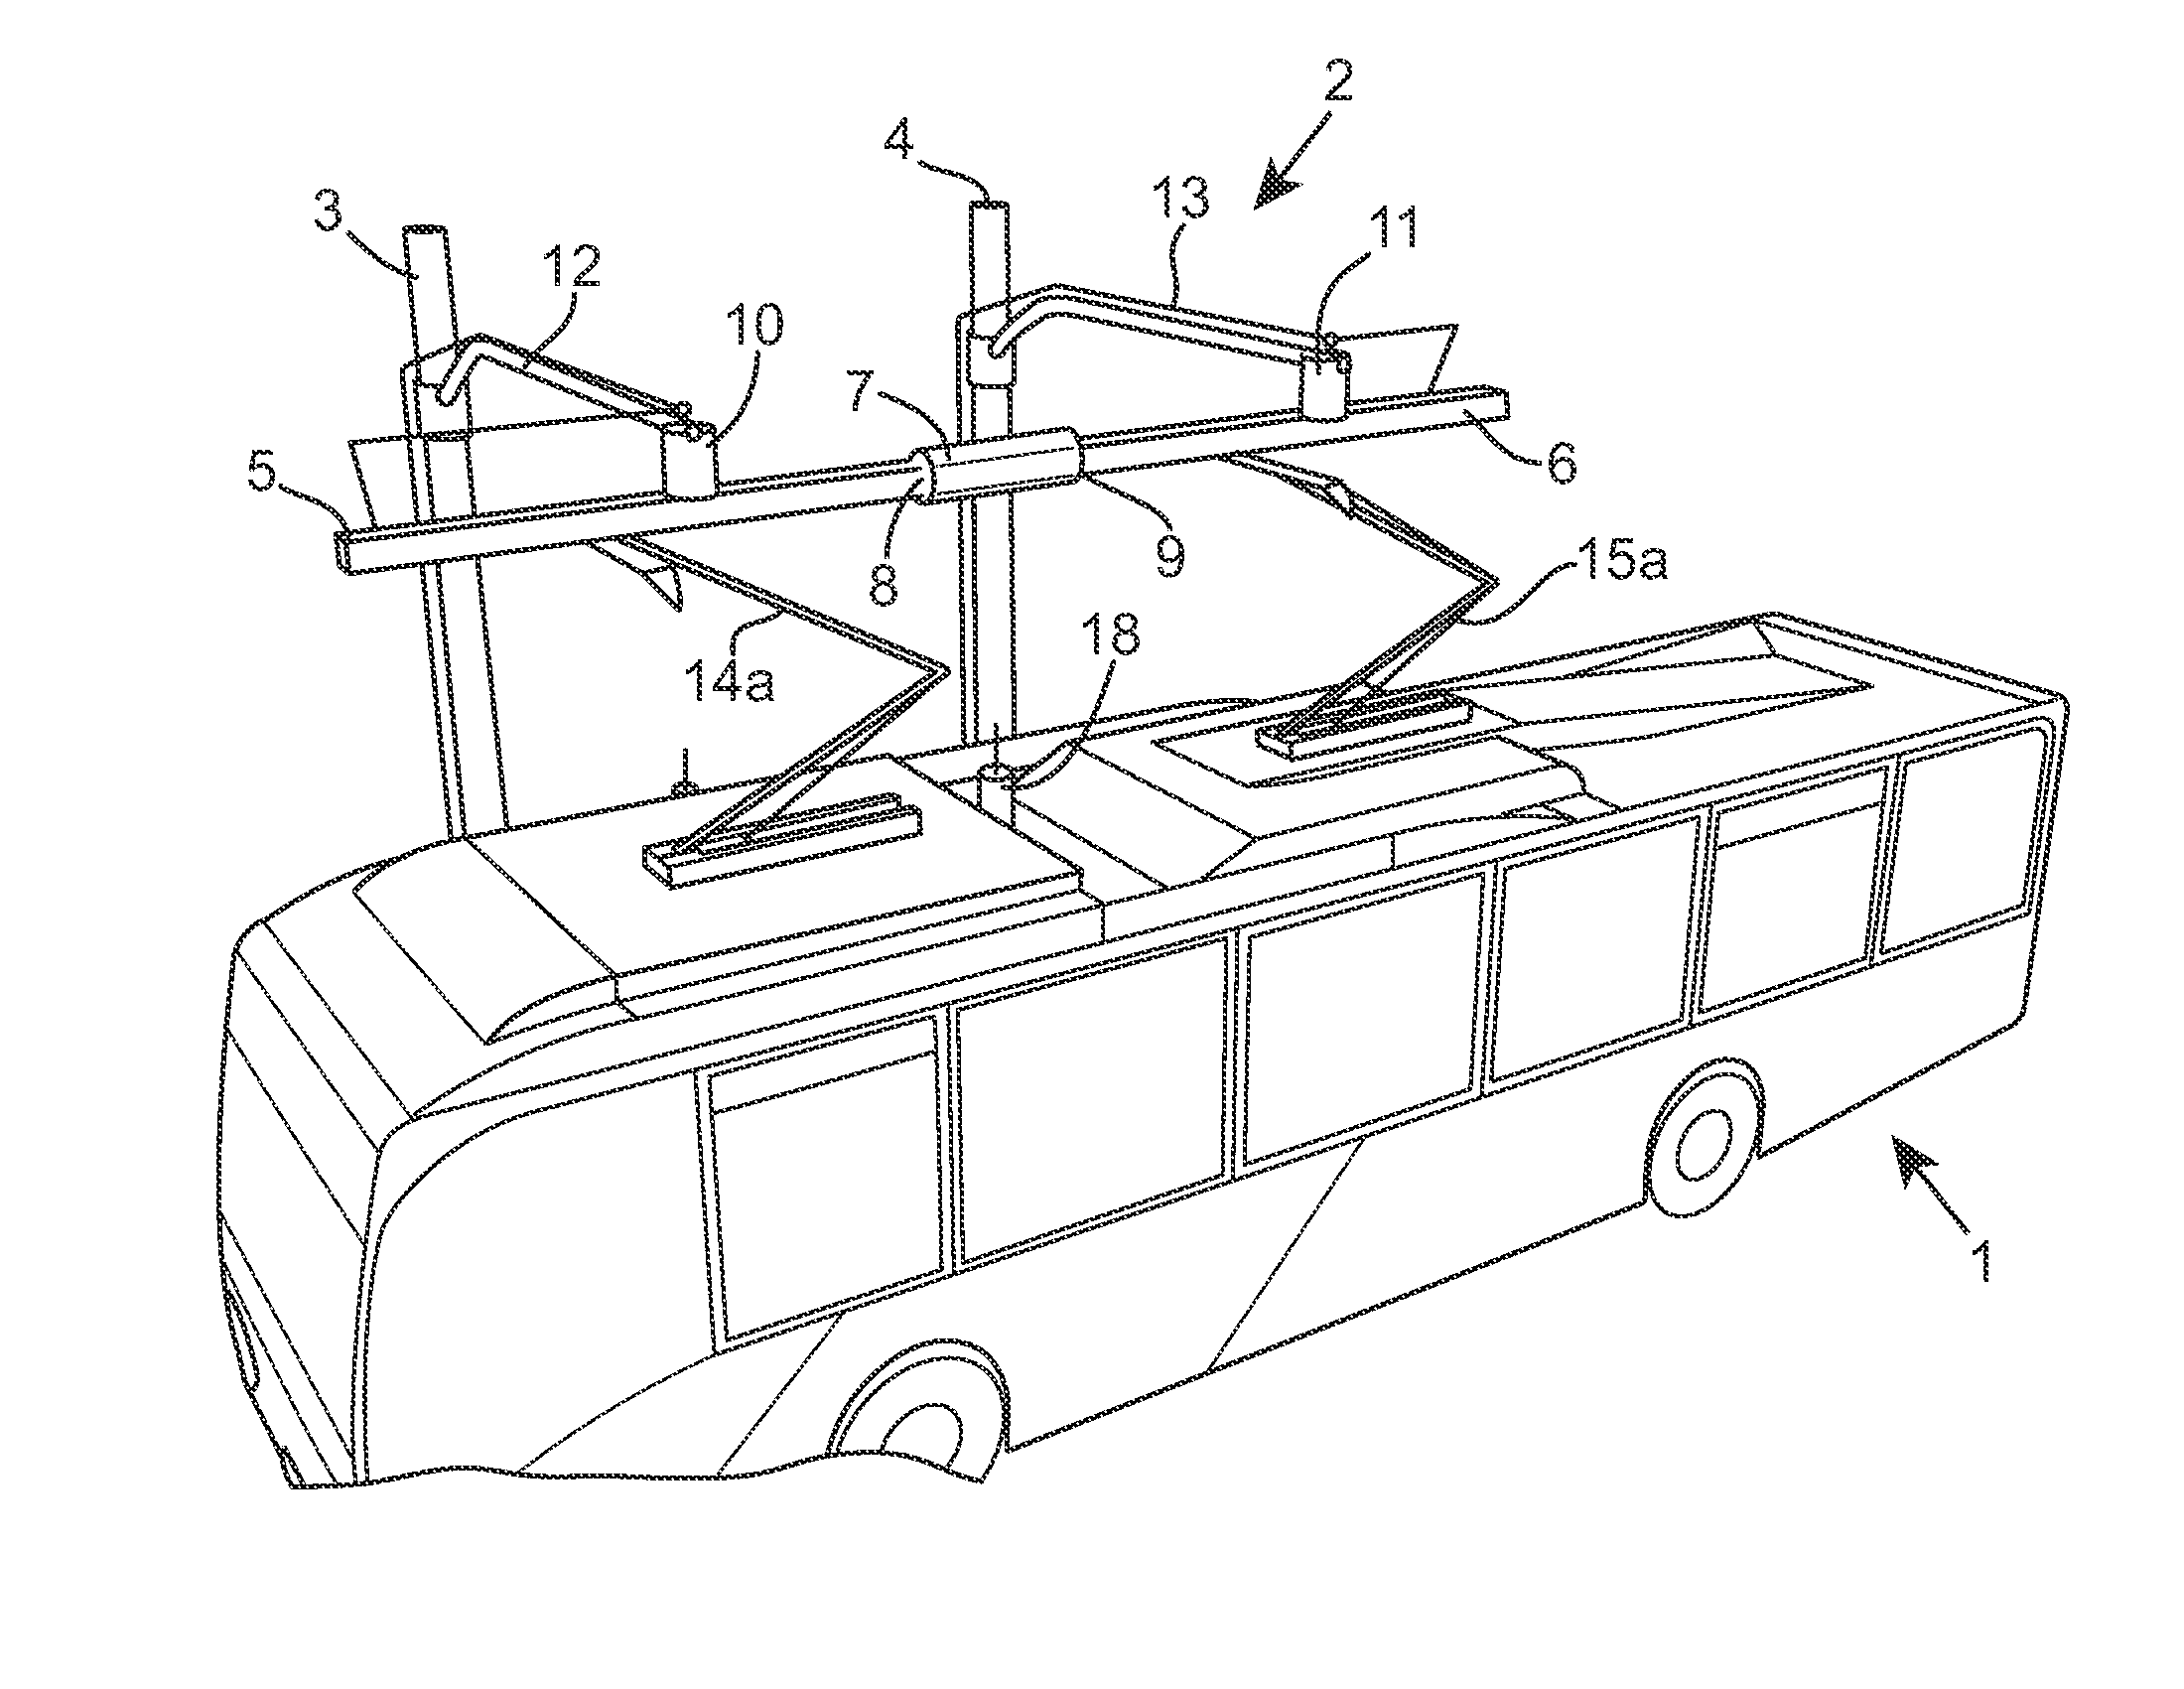 Electric vehicle charging station and charge receiving arrangement for a vehicle